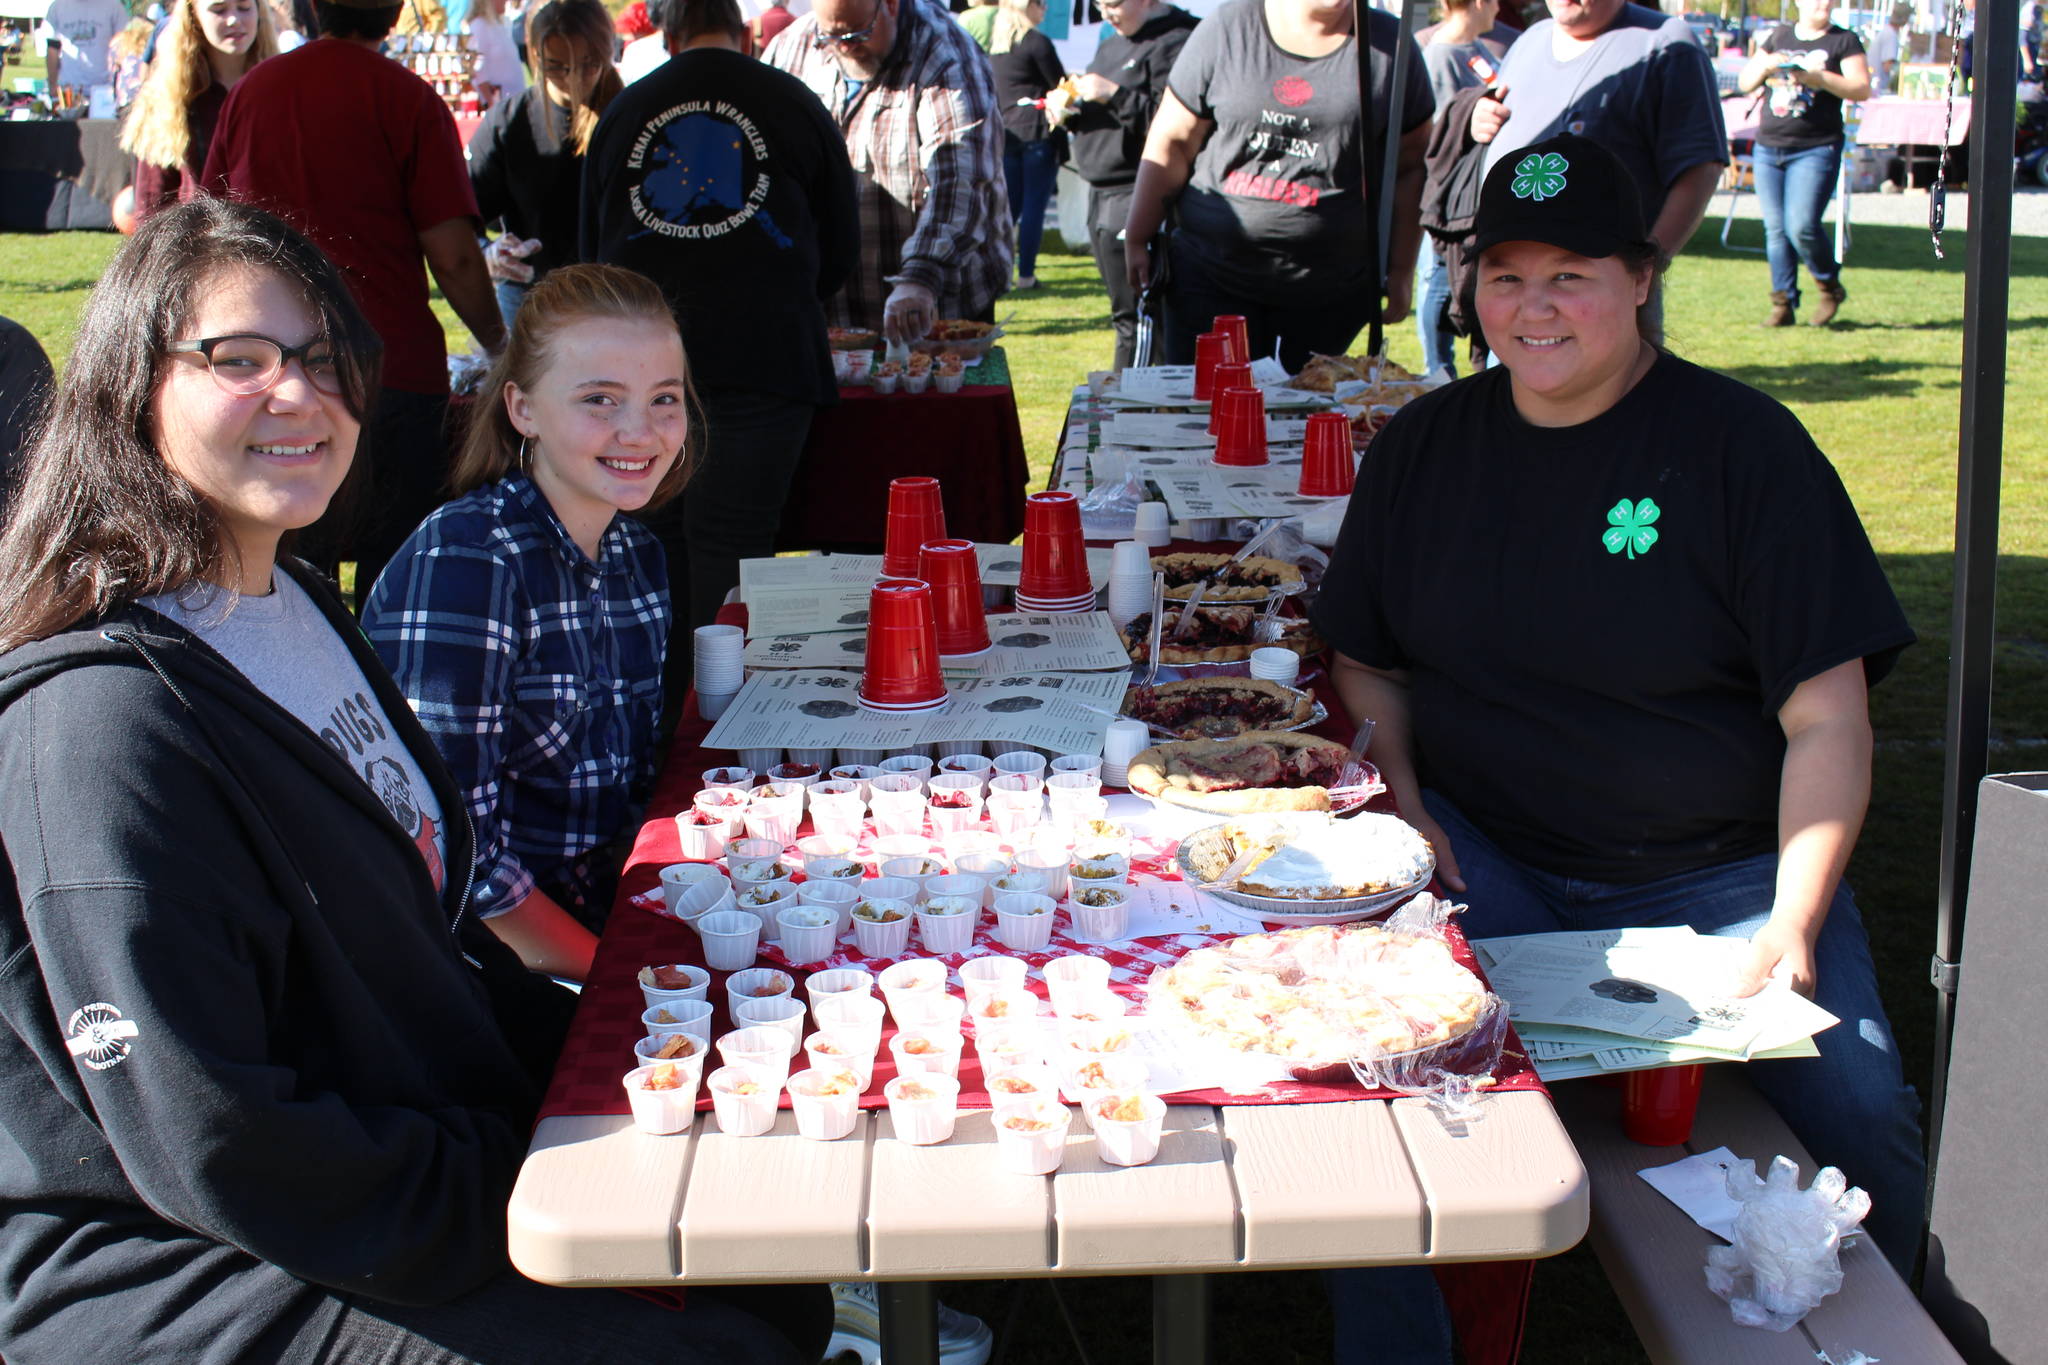 From left, Tina Uta, Melanie Carpenter and Becky Uta prepare pie samples for the people’s choice pie contest at the Harvest Moon Local Food Festival at Soldotna Creek Park on Sept. 14, 2019. (Photo by Brian Mazurek/Peninsula Clarion)